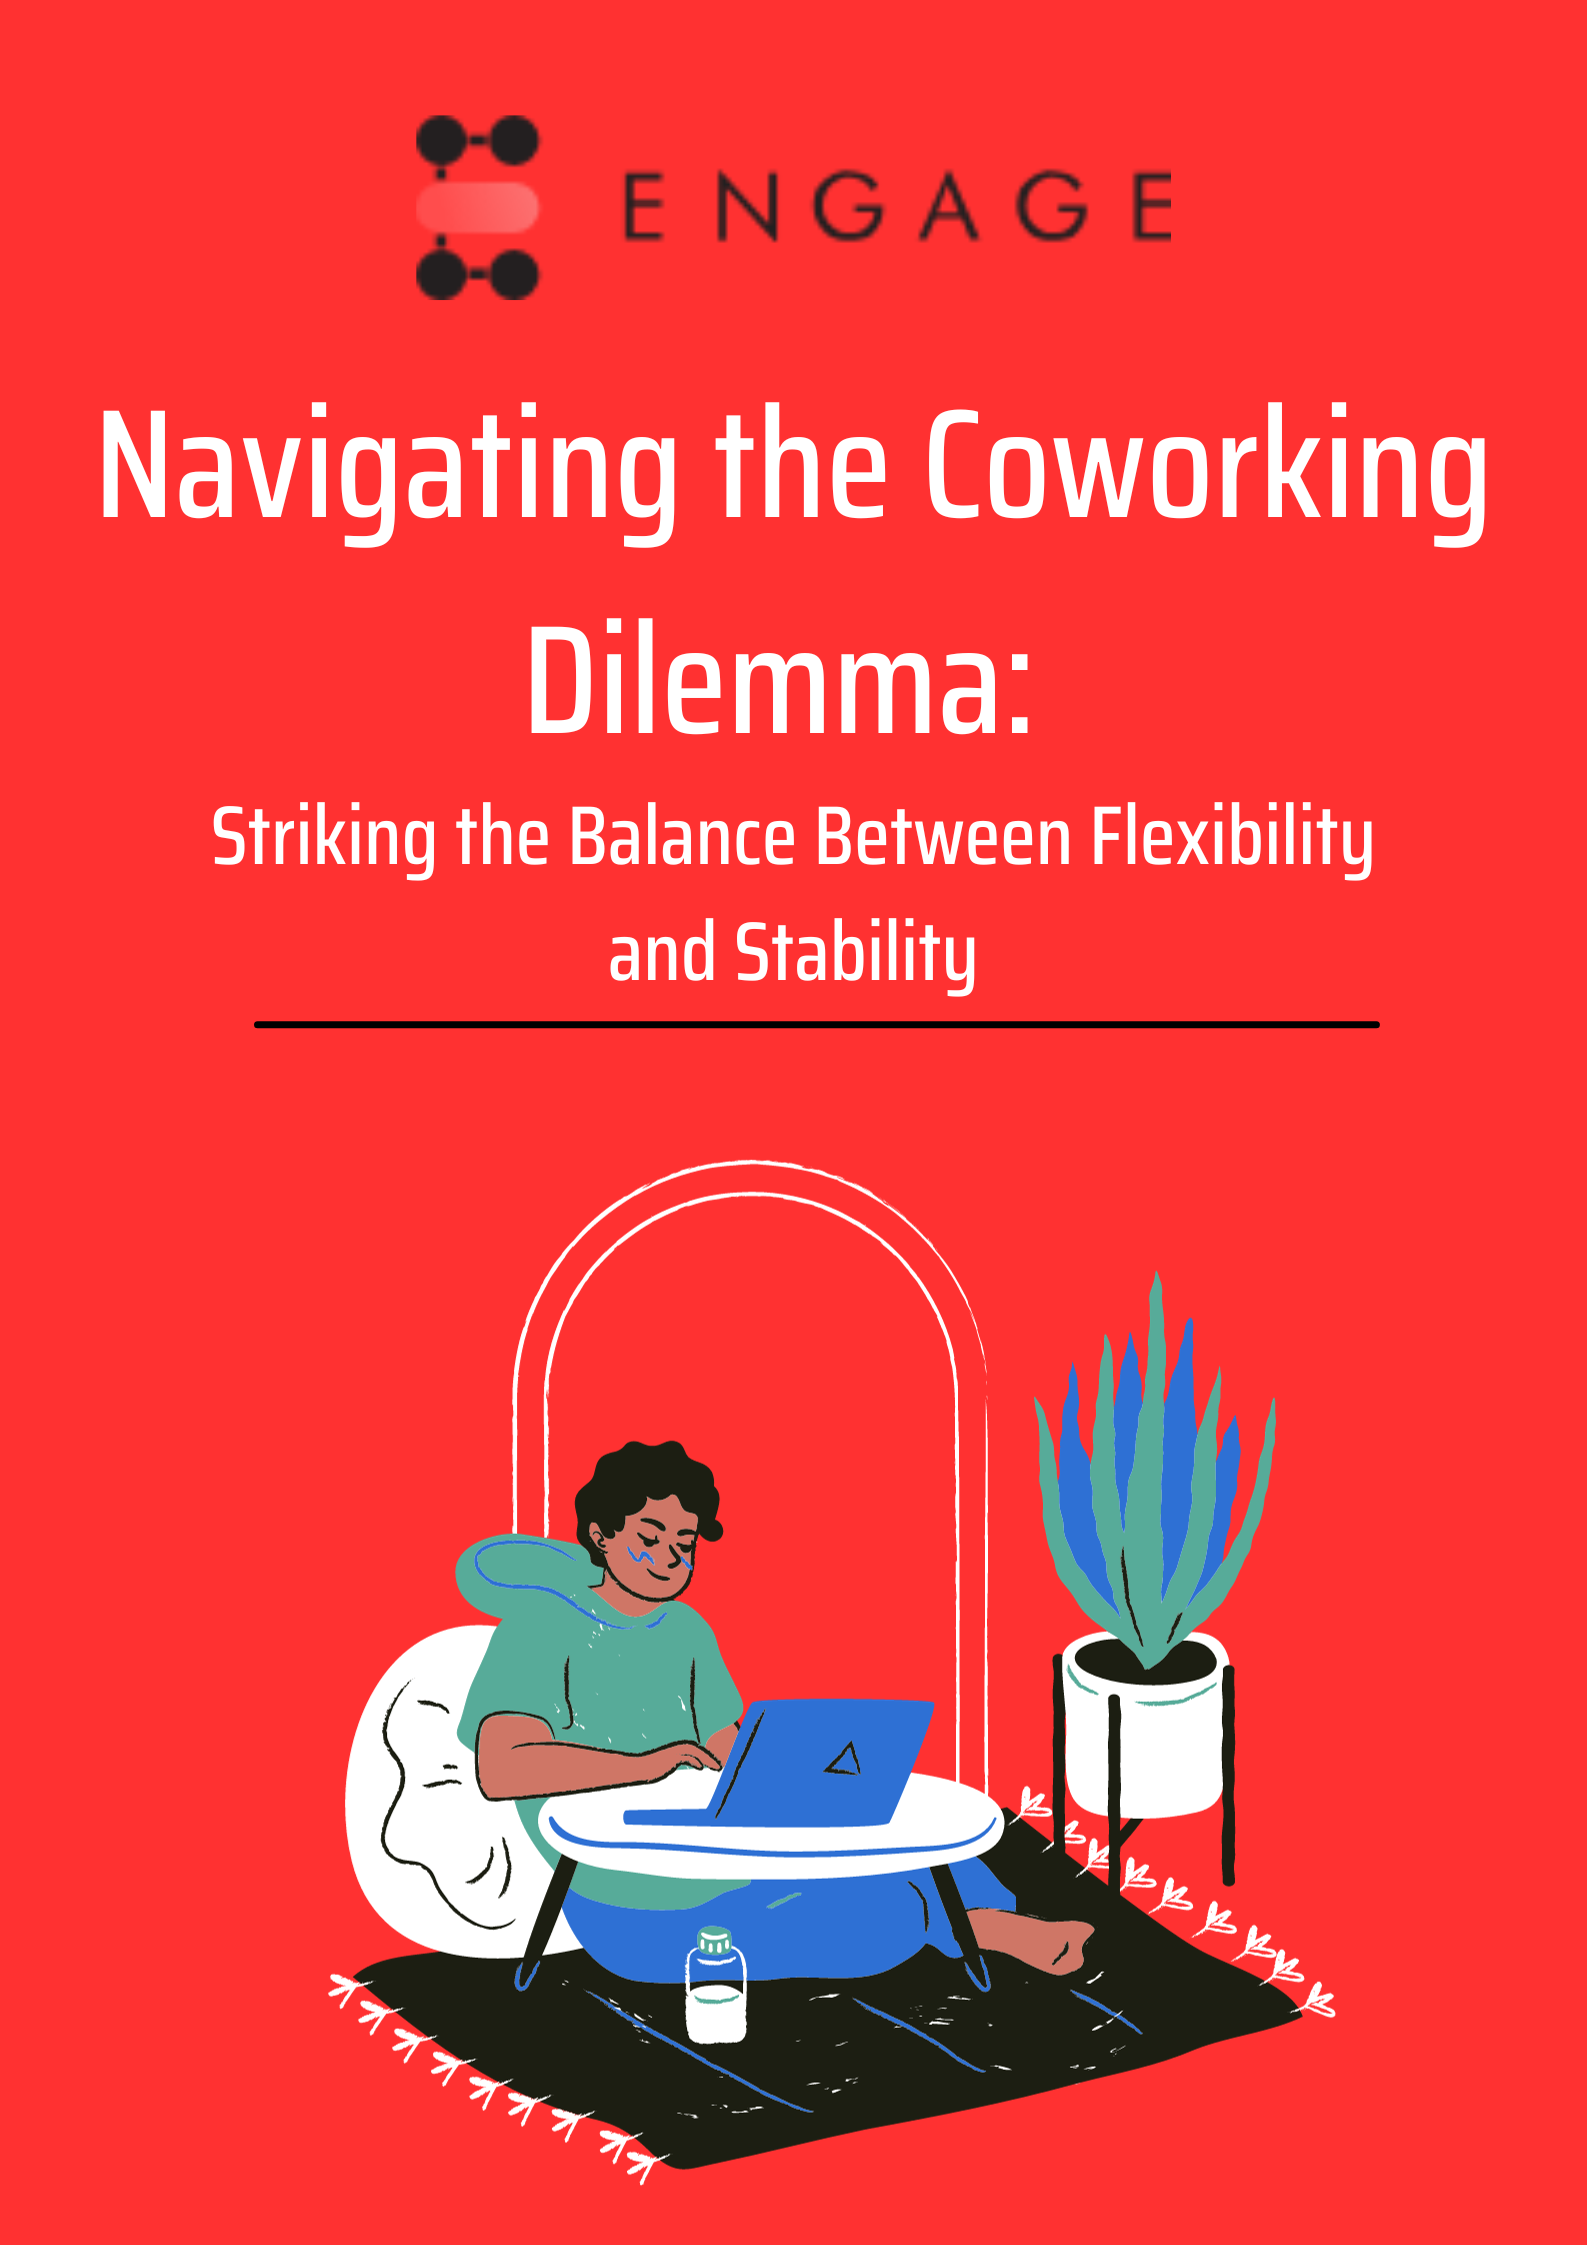 Navigating the Coworking Dilemma: Striking the Balance Between Flexibility and Stability